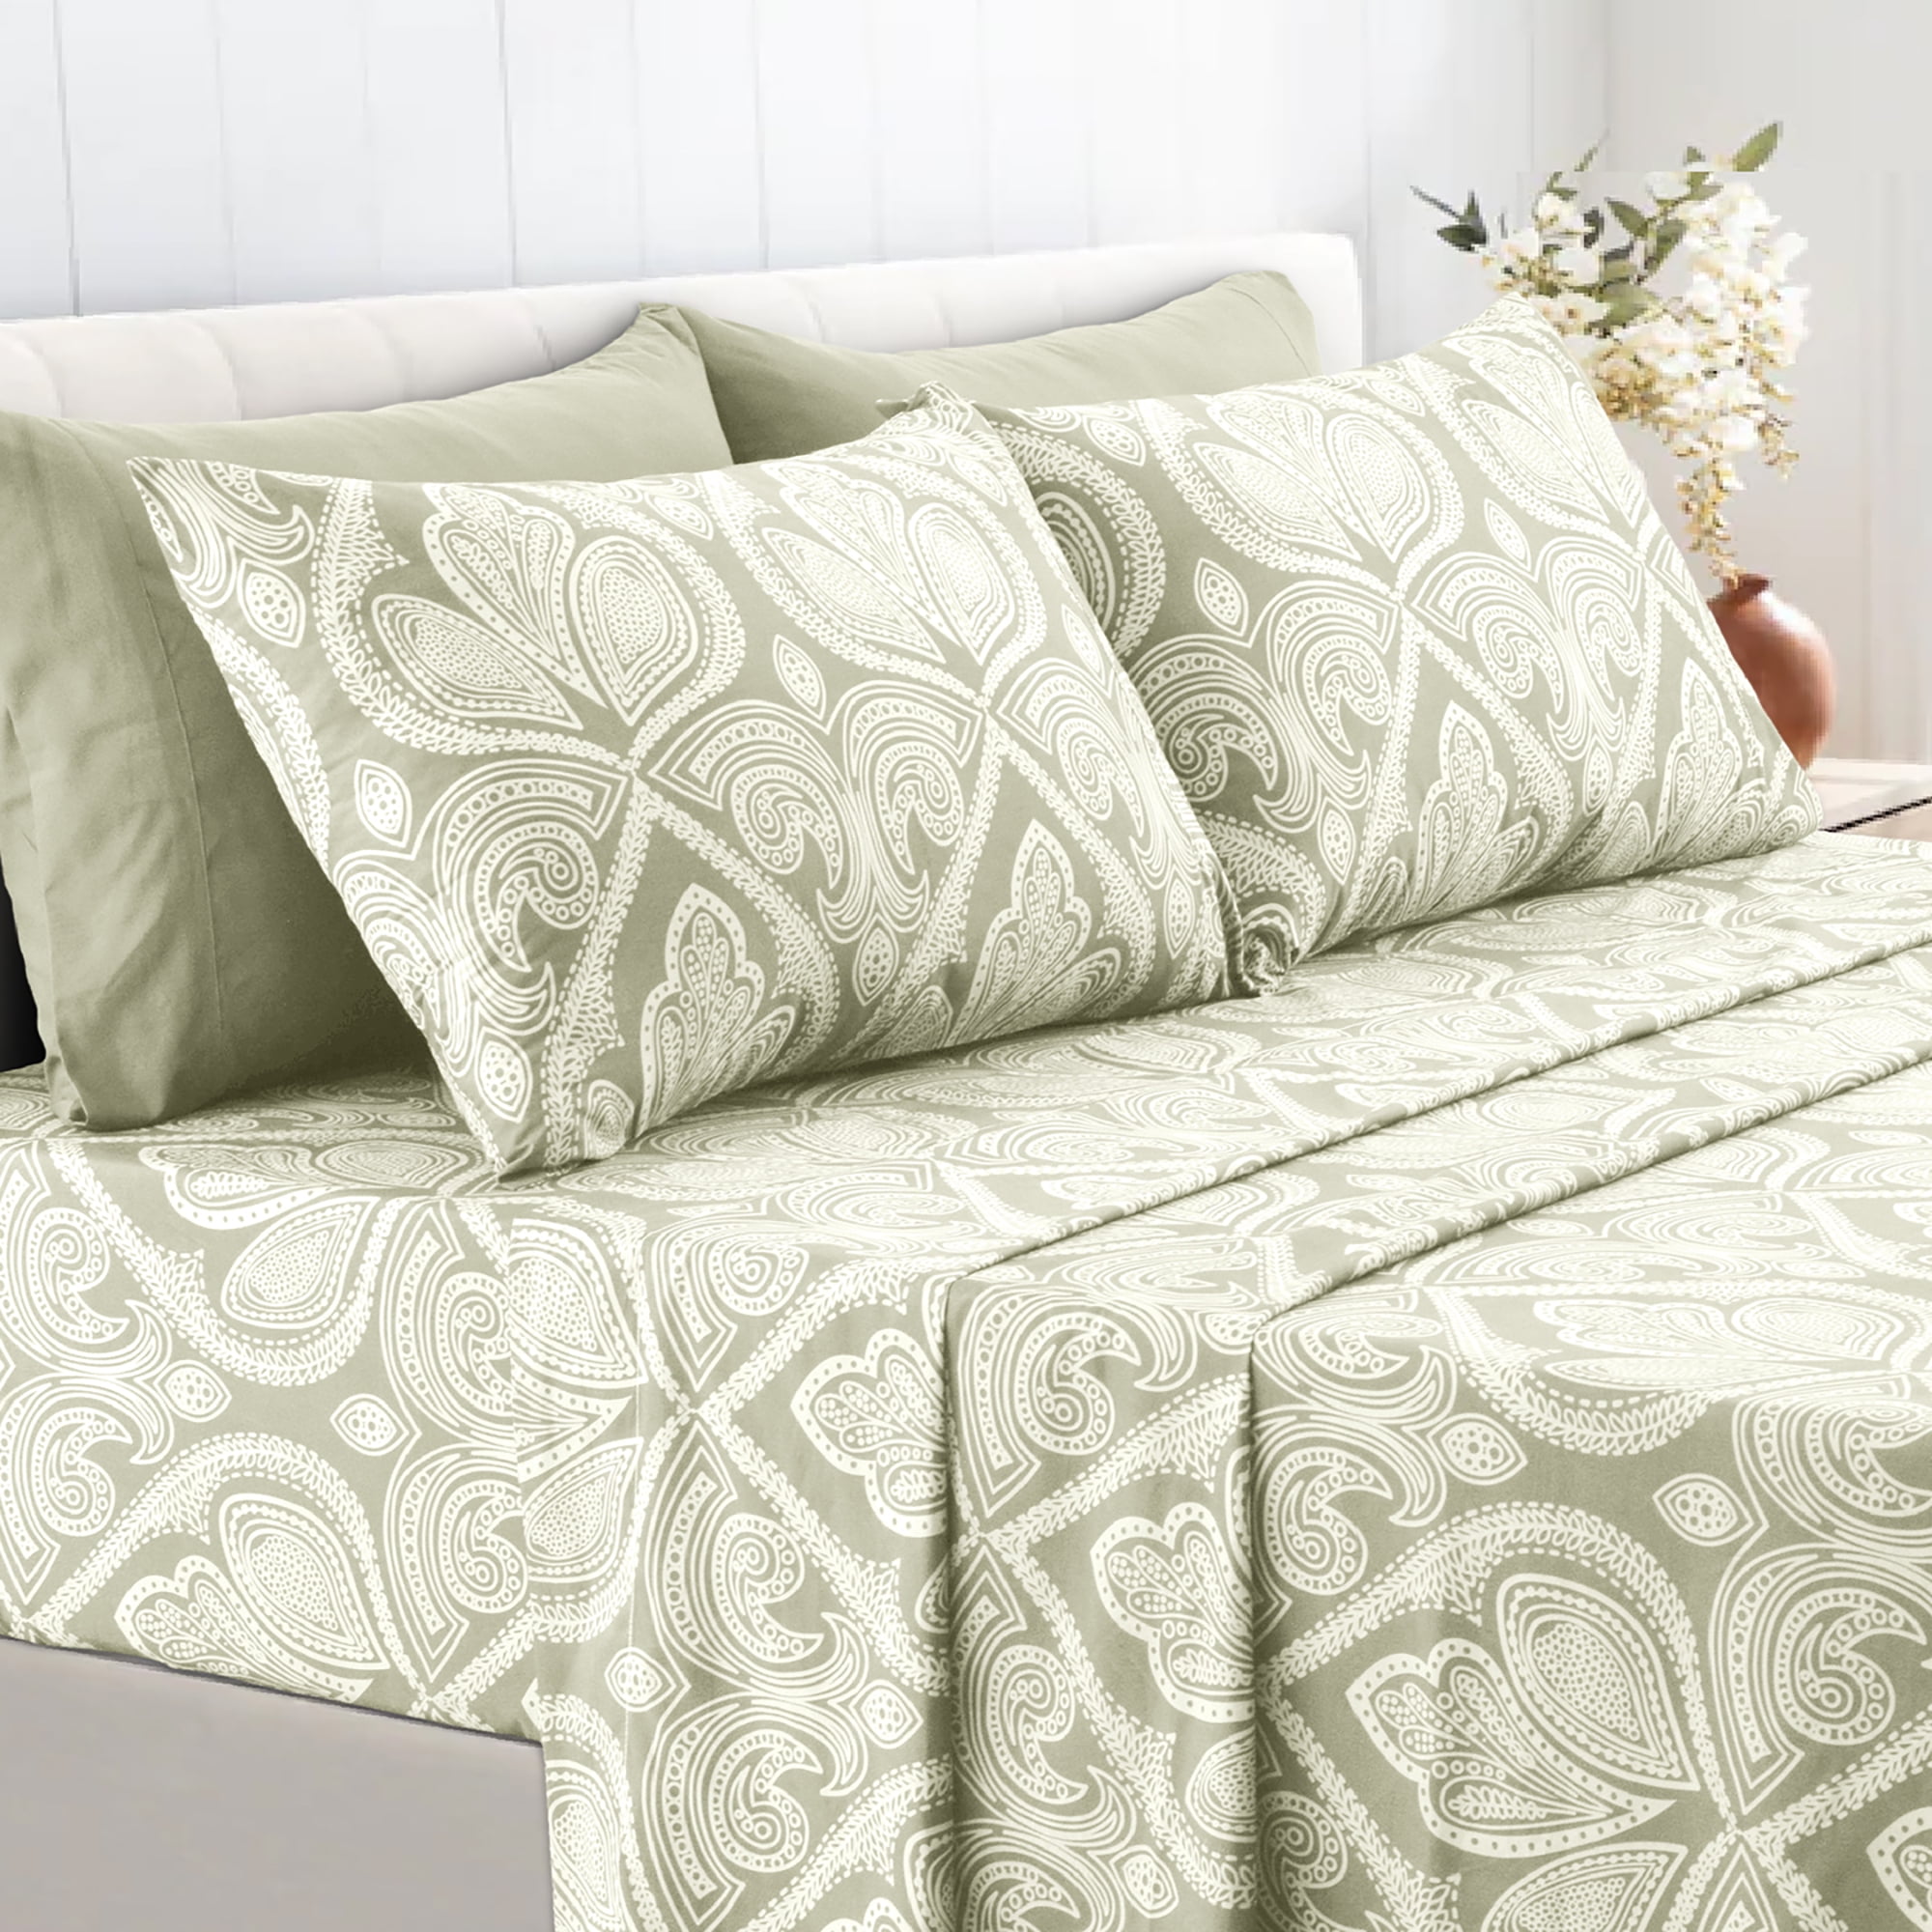 Details about   NEW Members Mark 100% Cotton 4pc Flannel Sheets Set FAST SHIPPING!